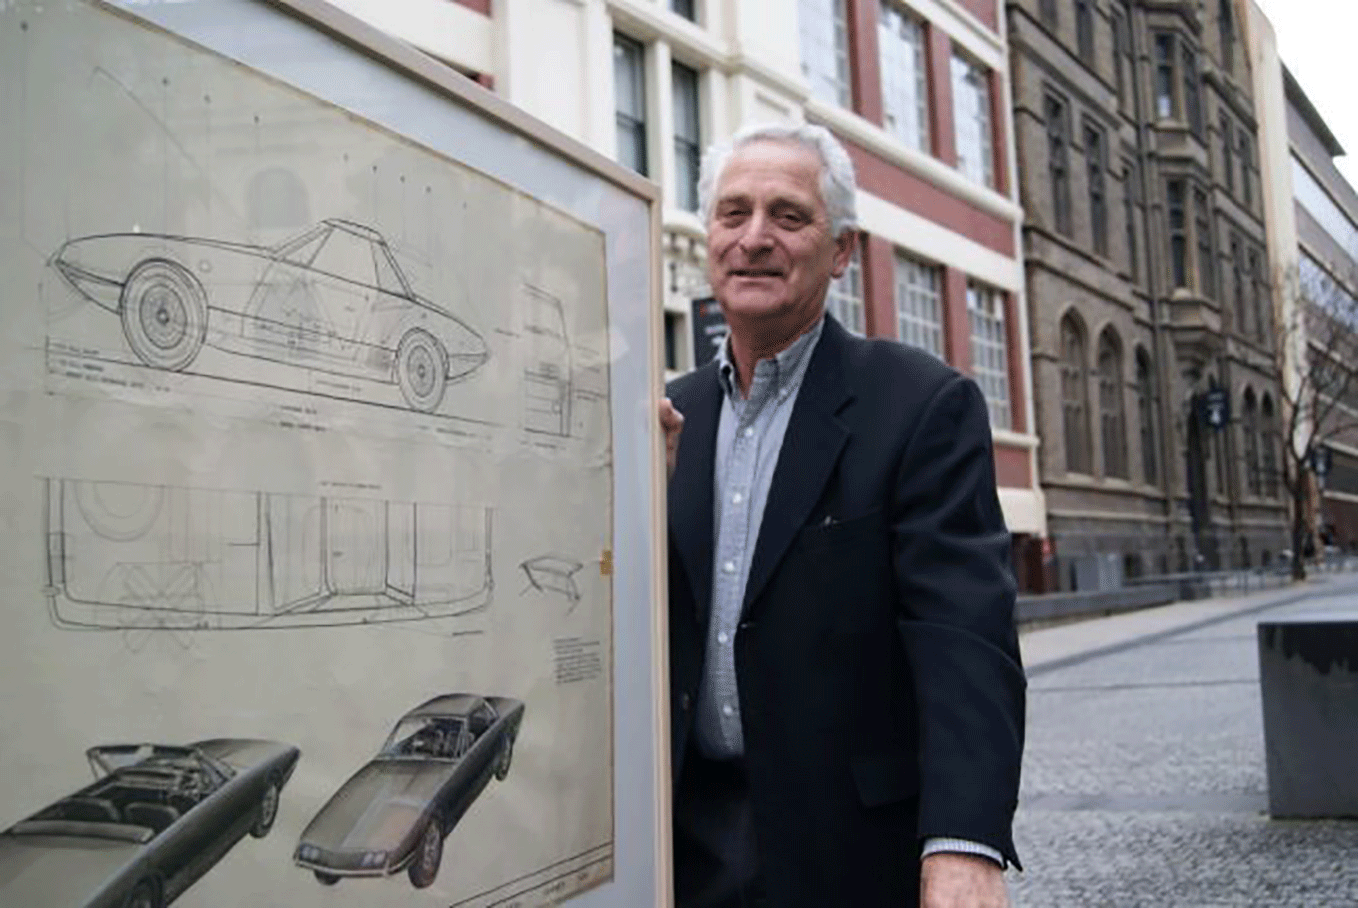 Phillip Zmood with one of his donated car sketches